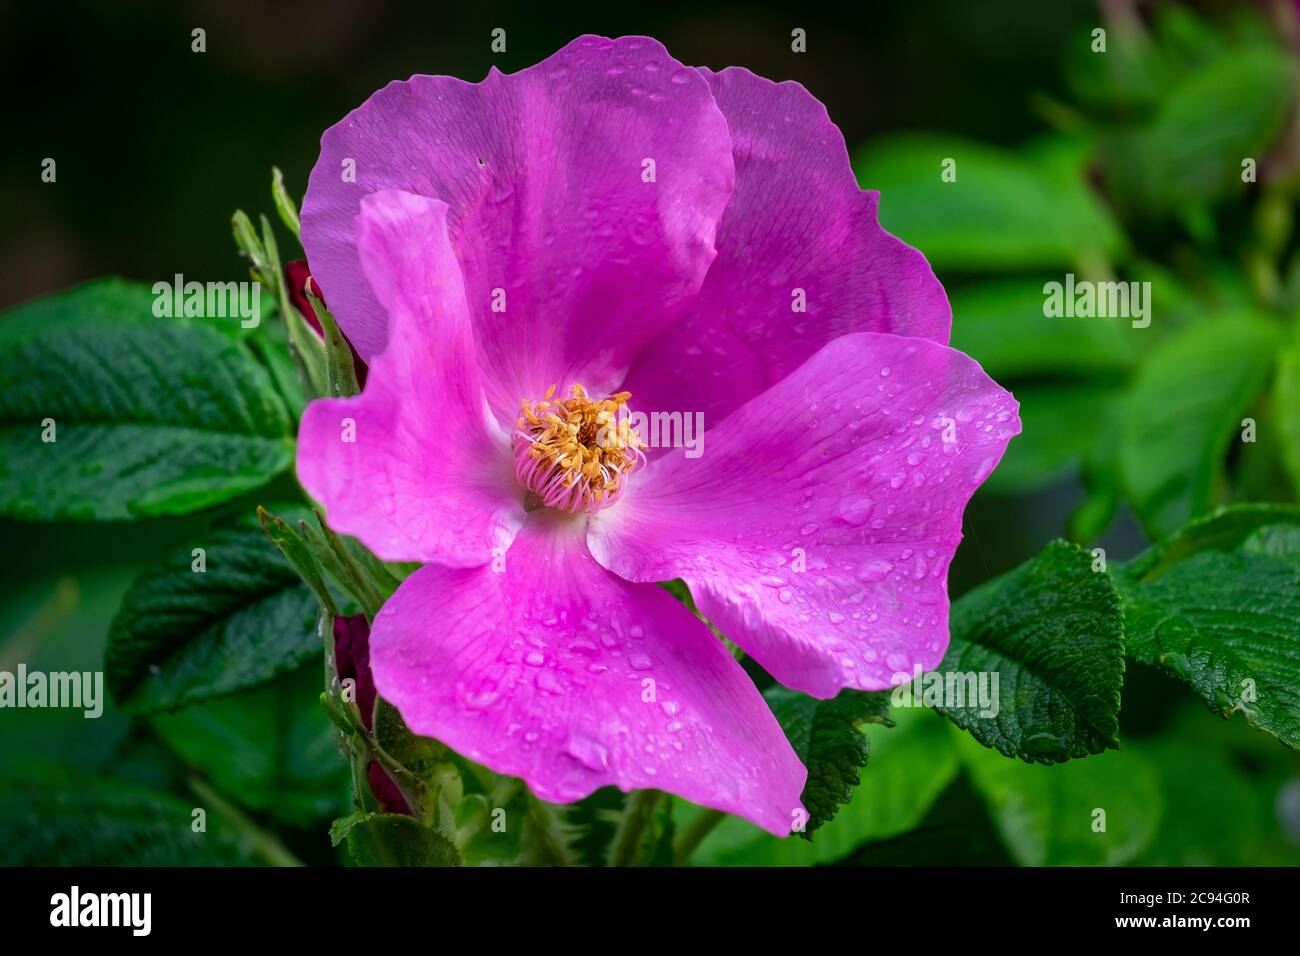 A large fuchsia flower, wild cinnamon  rose, with a yellow center.  The stamens are yellow, petals are papery and pink with a shiny surface. Stock Photo